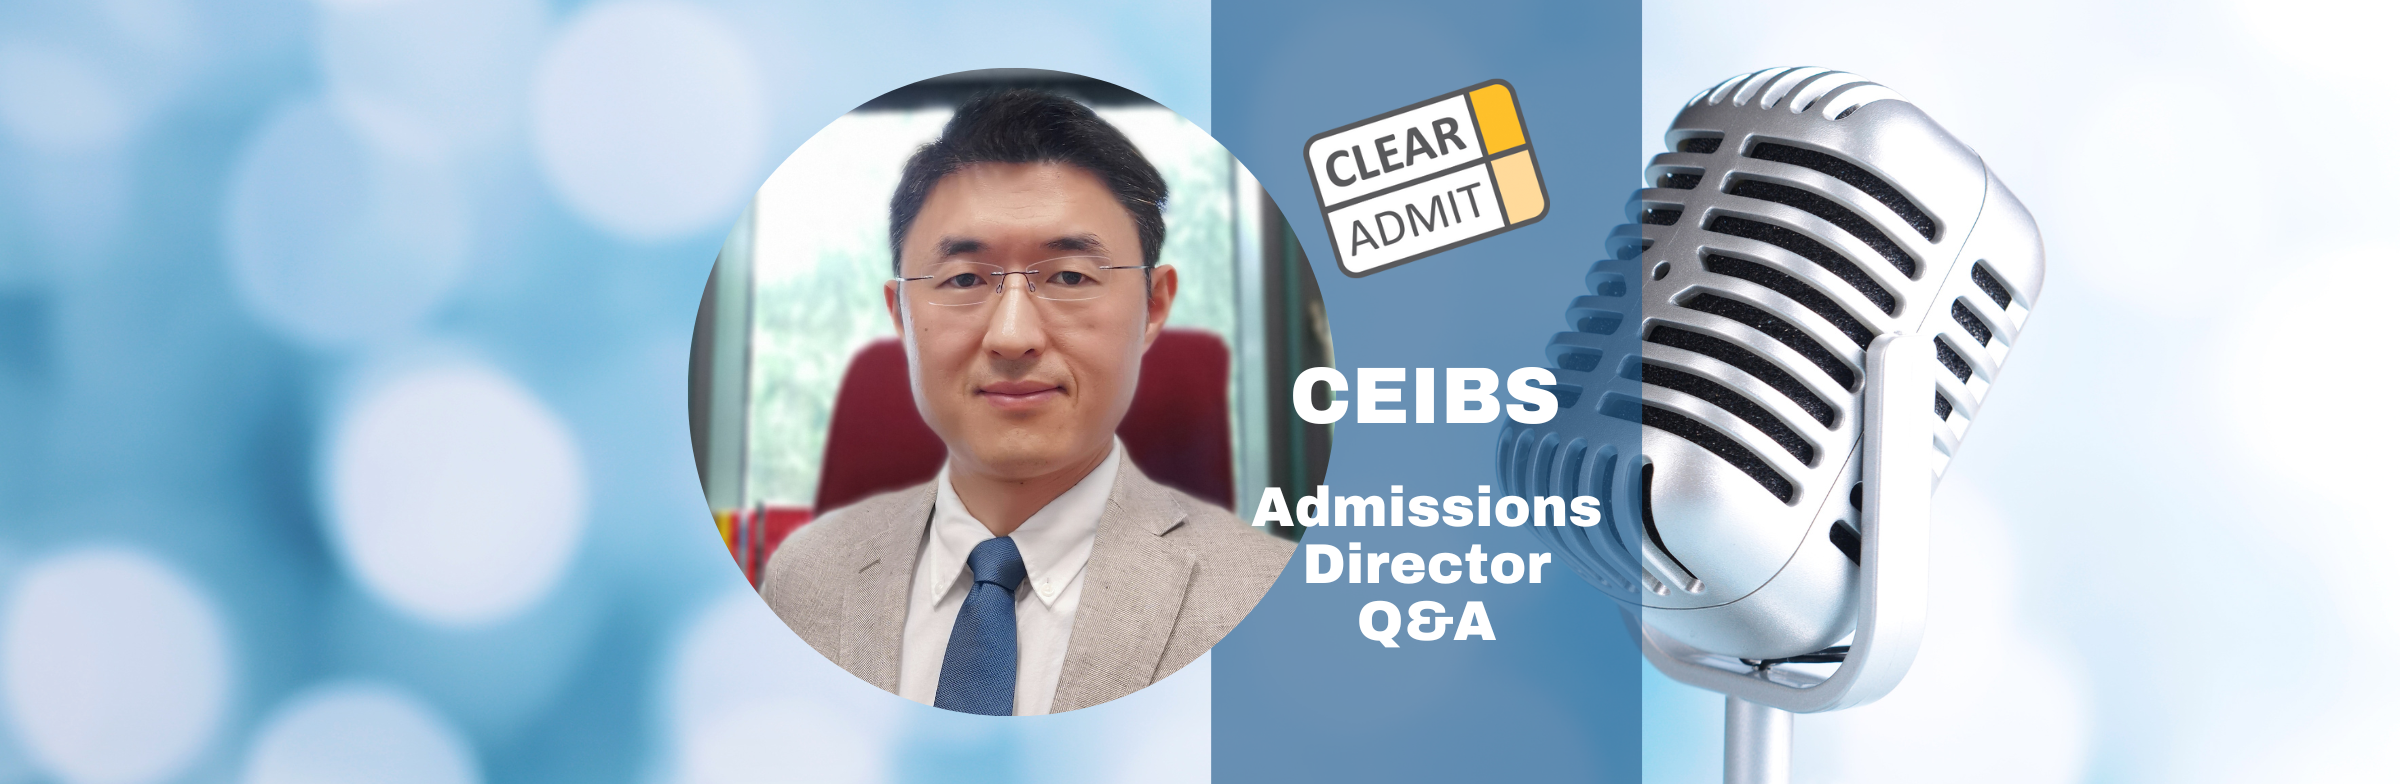 Image for Admissions Director Q&A: Steven Ji of CEIBS